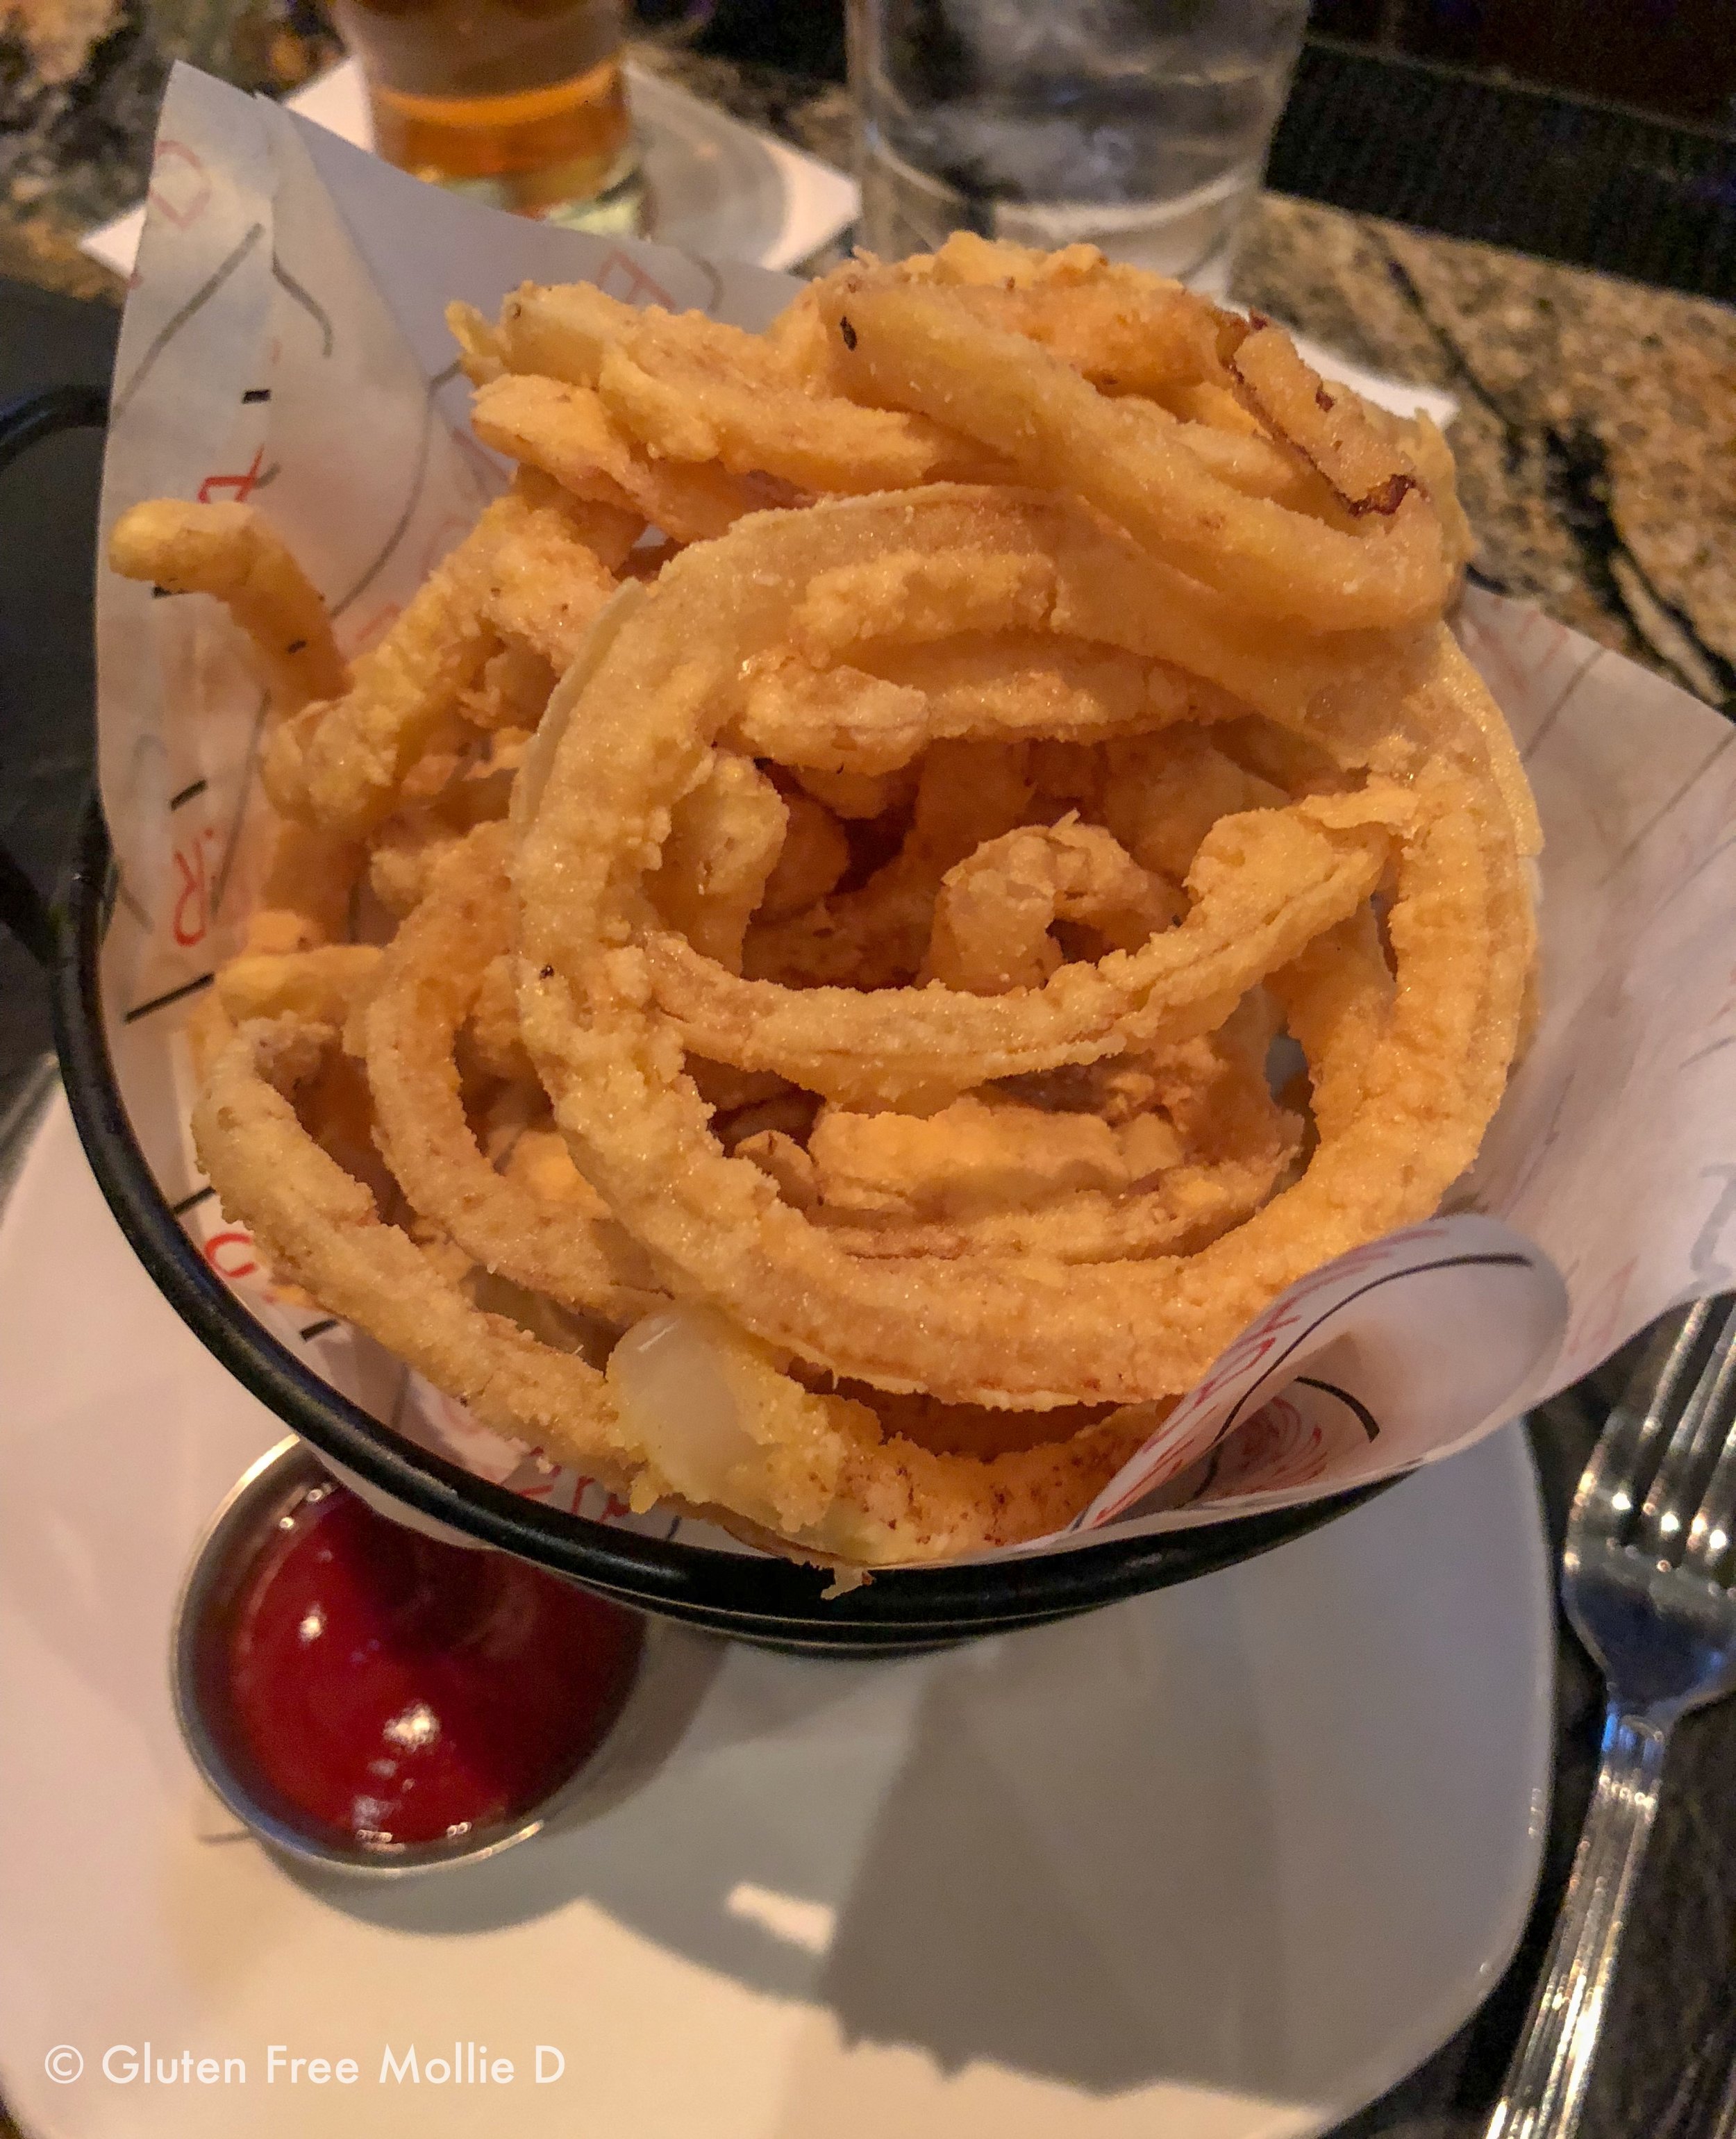  Gluten free onion rings - perfection.  